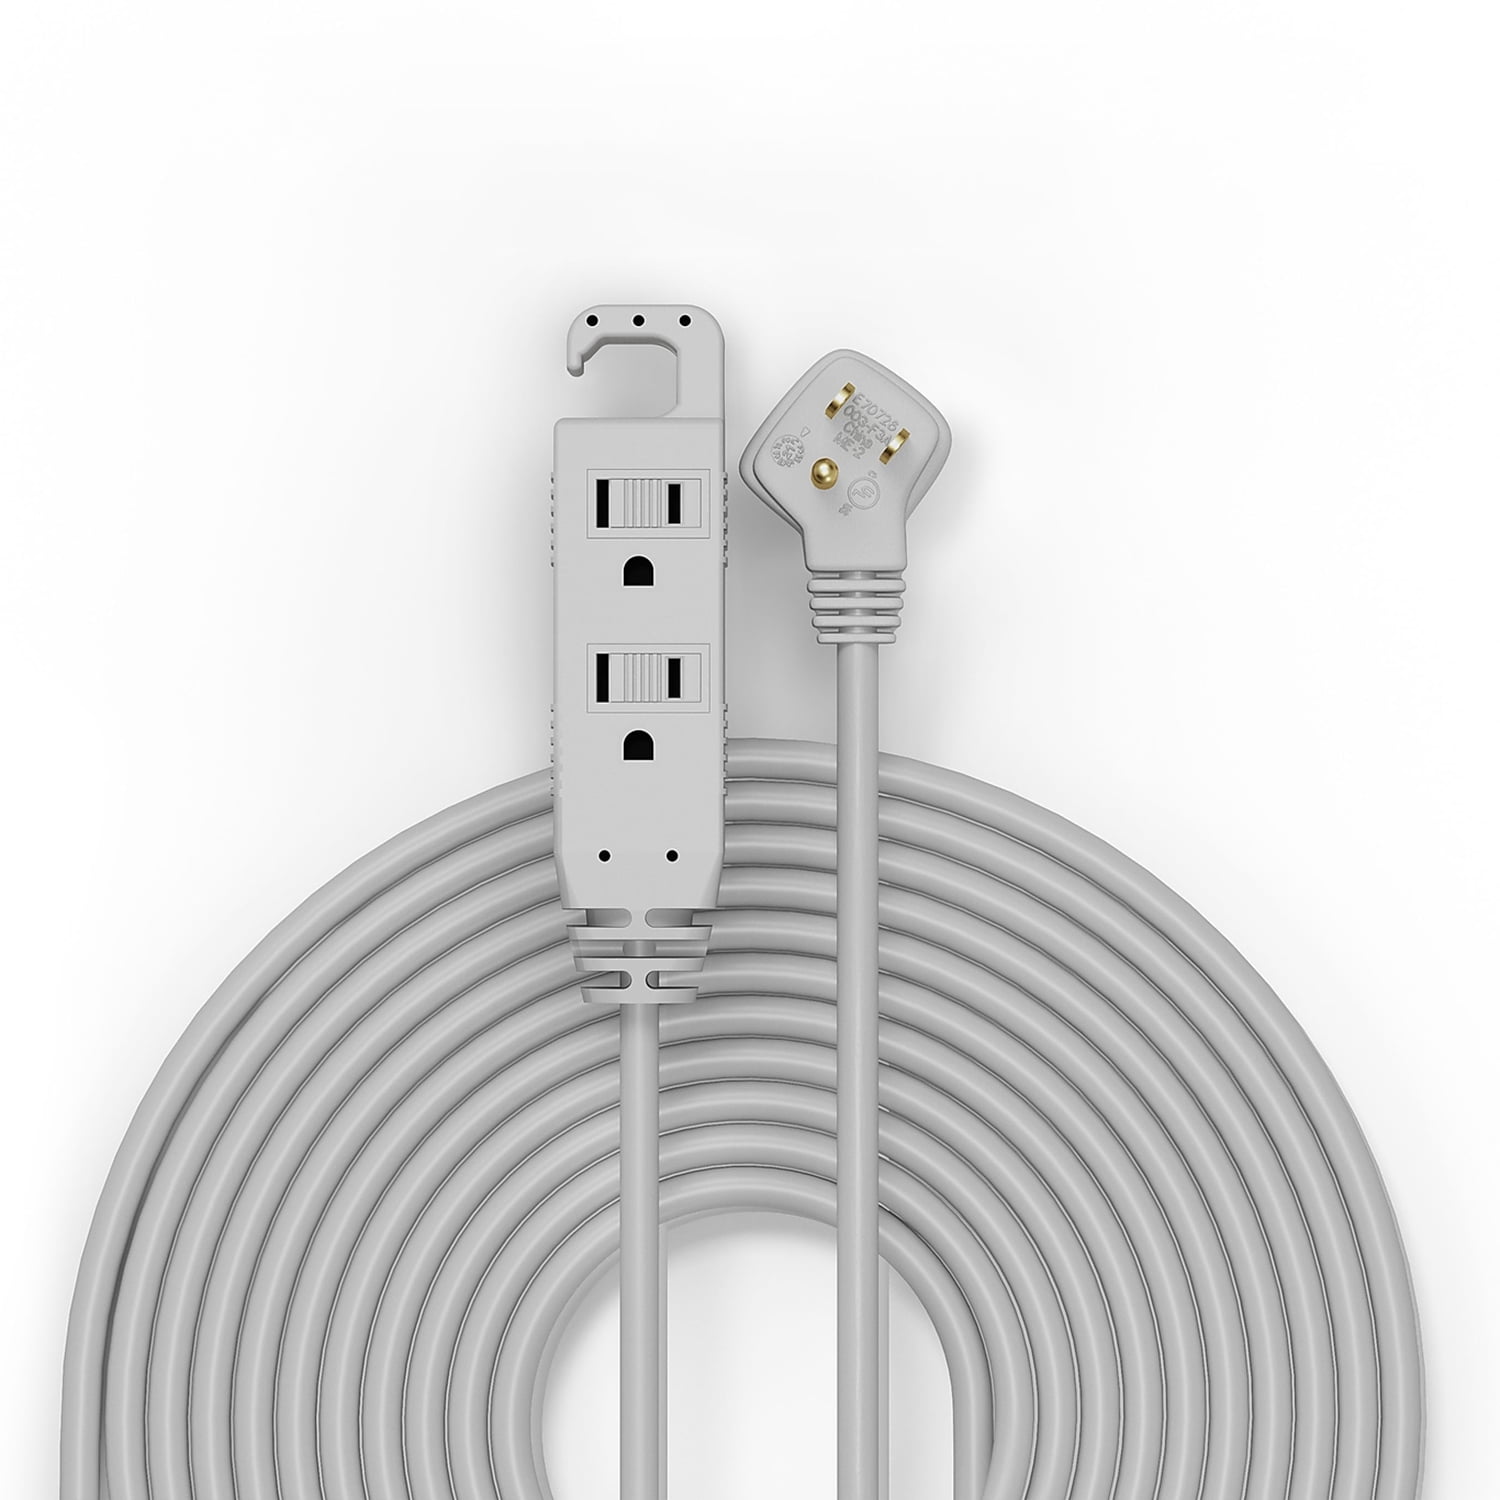 Set Of Twelve 25-inch Cord Covers – 300-inch Total On-wall Cable